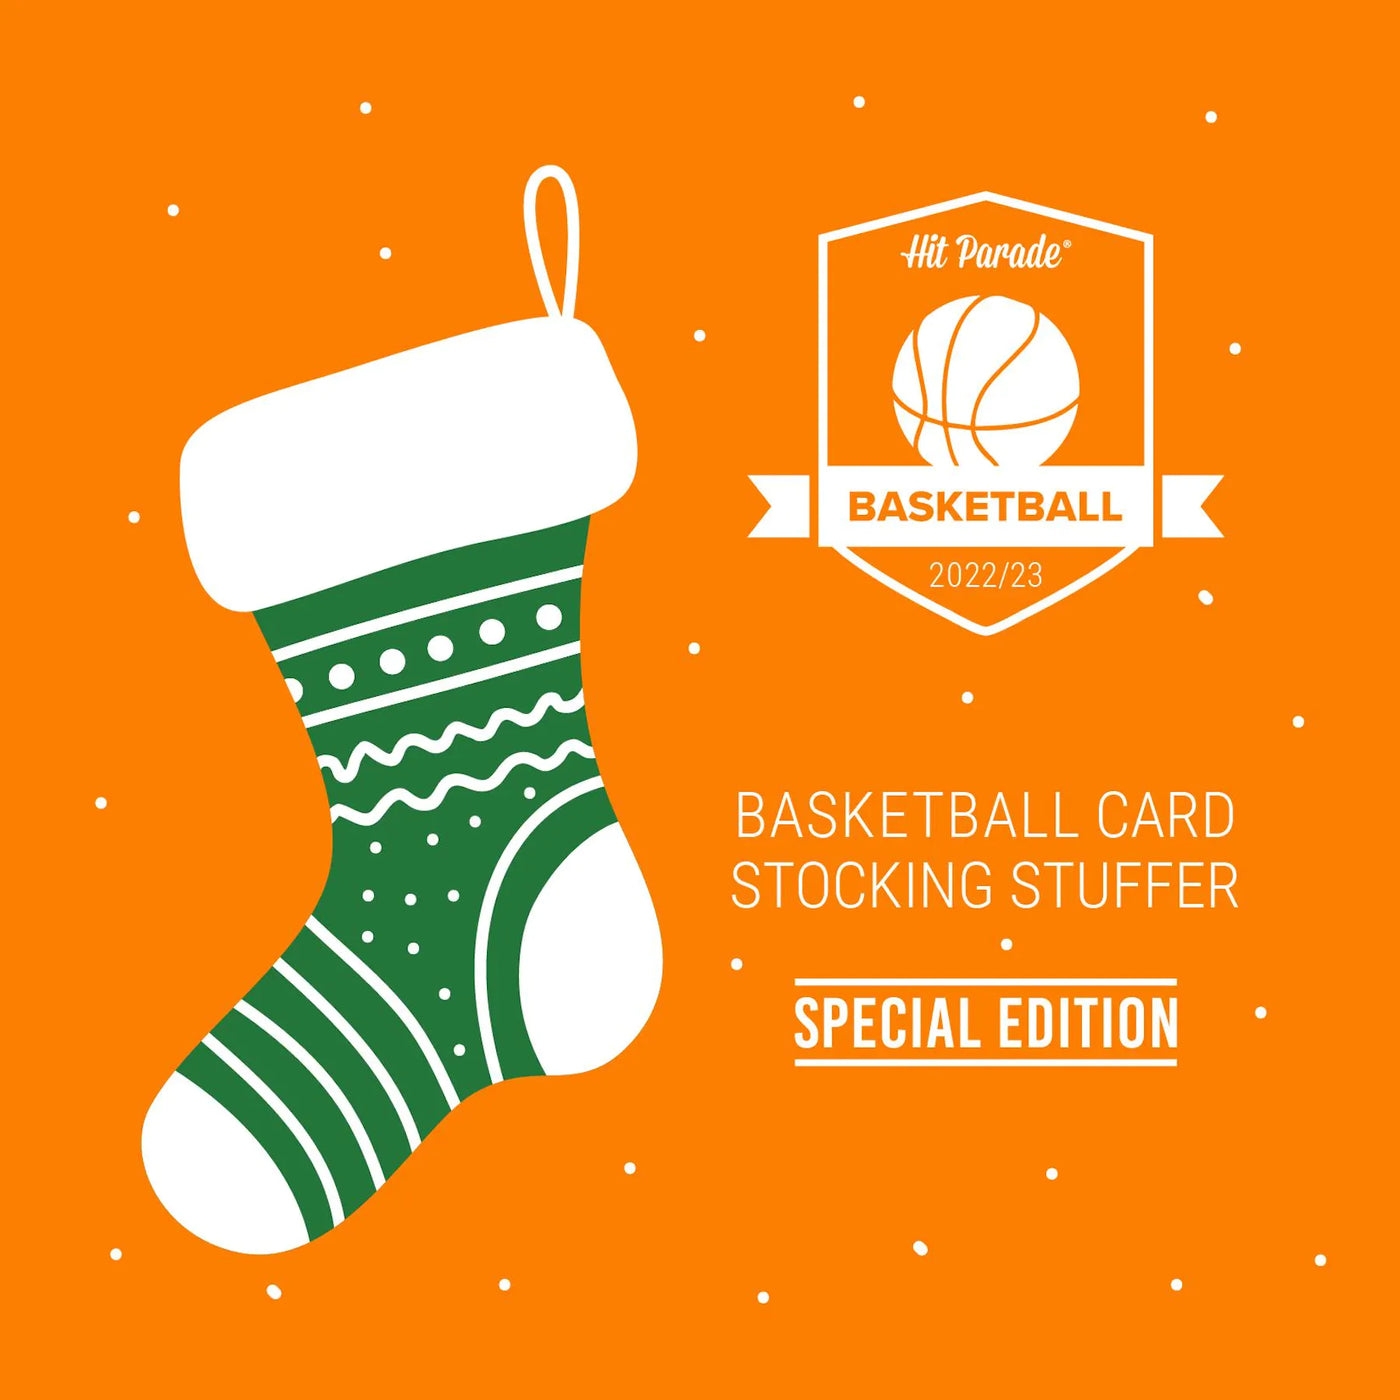 Hit Parade - 2022/23 Basketball Card Stocking Stuffer Special Edition - Series 2